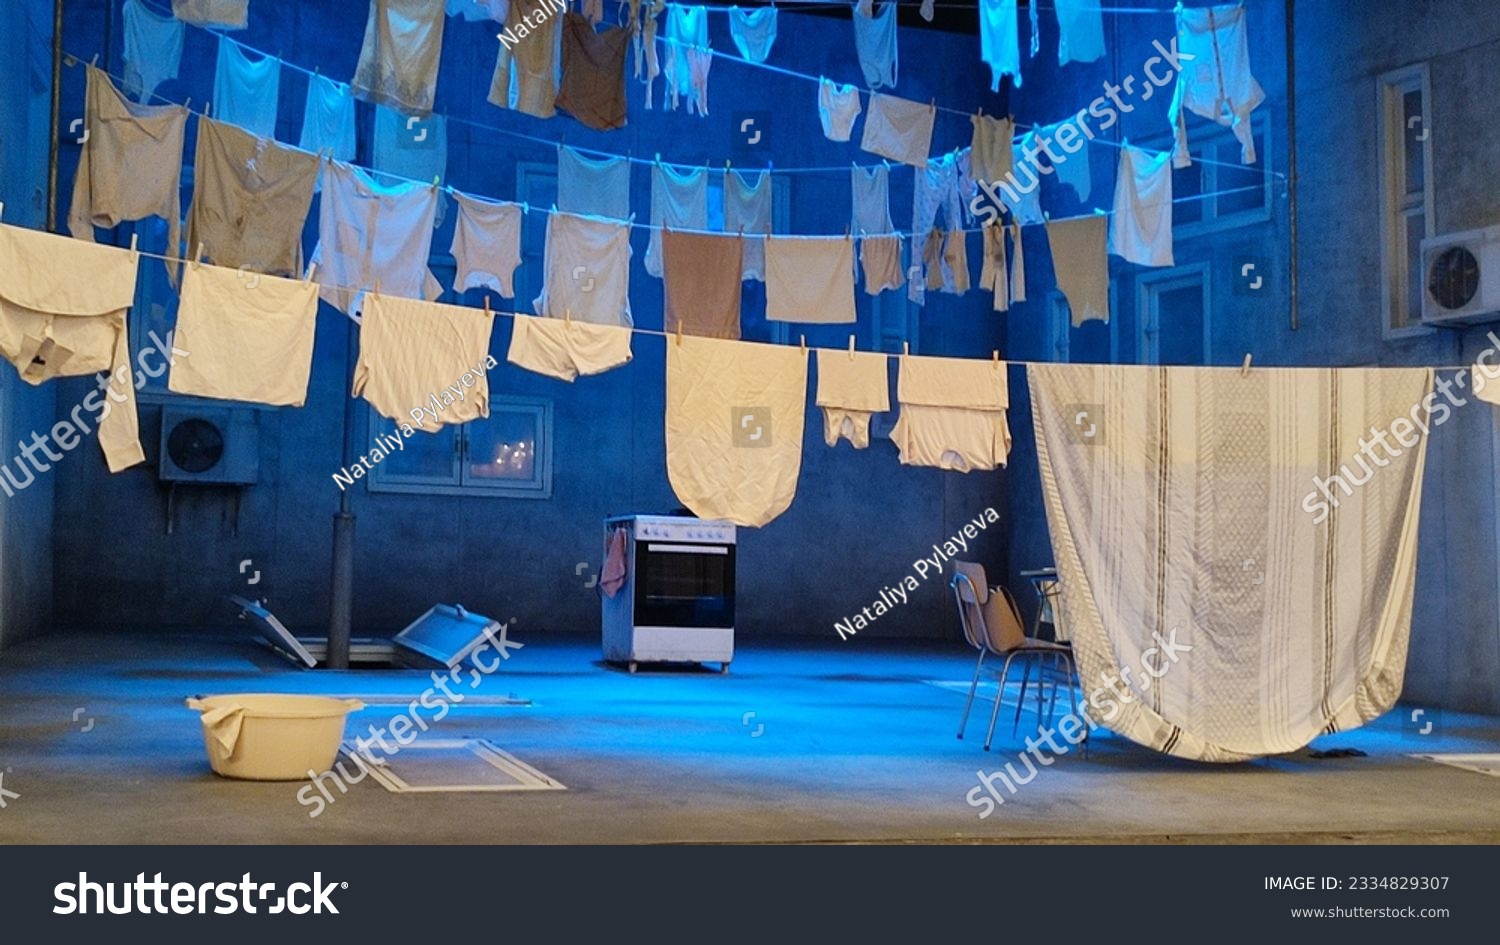 theater scenery on the stage, white bed linen being dried on clothesline, art. High quality photo #2334829307